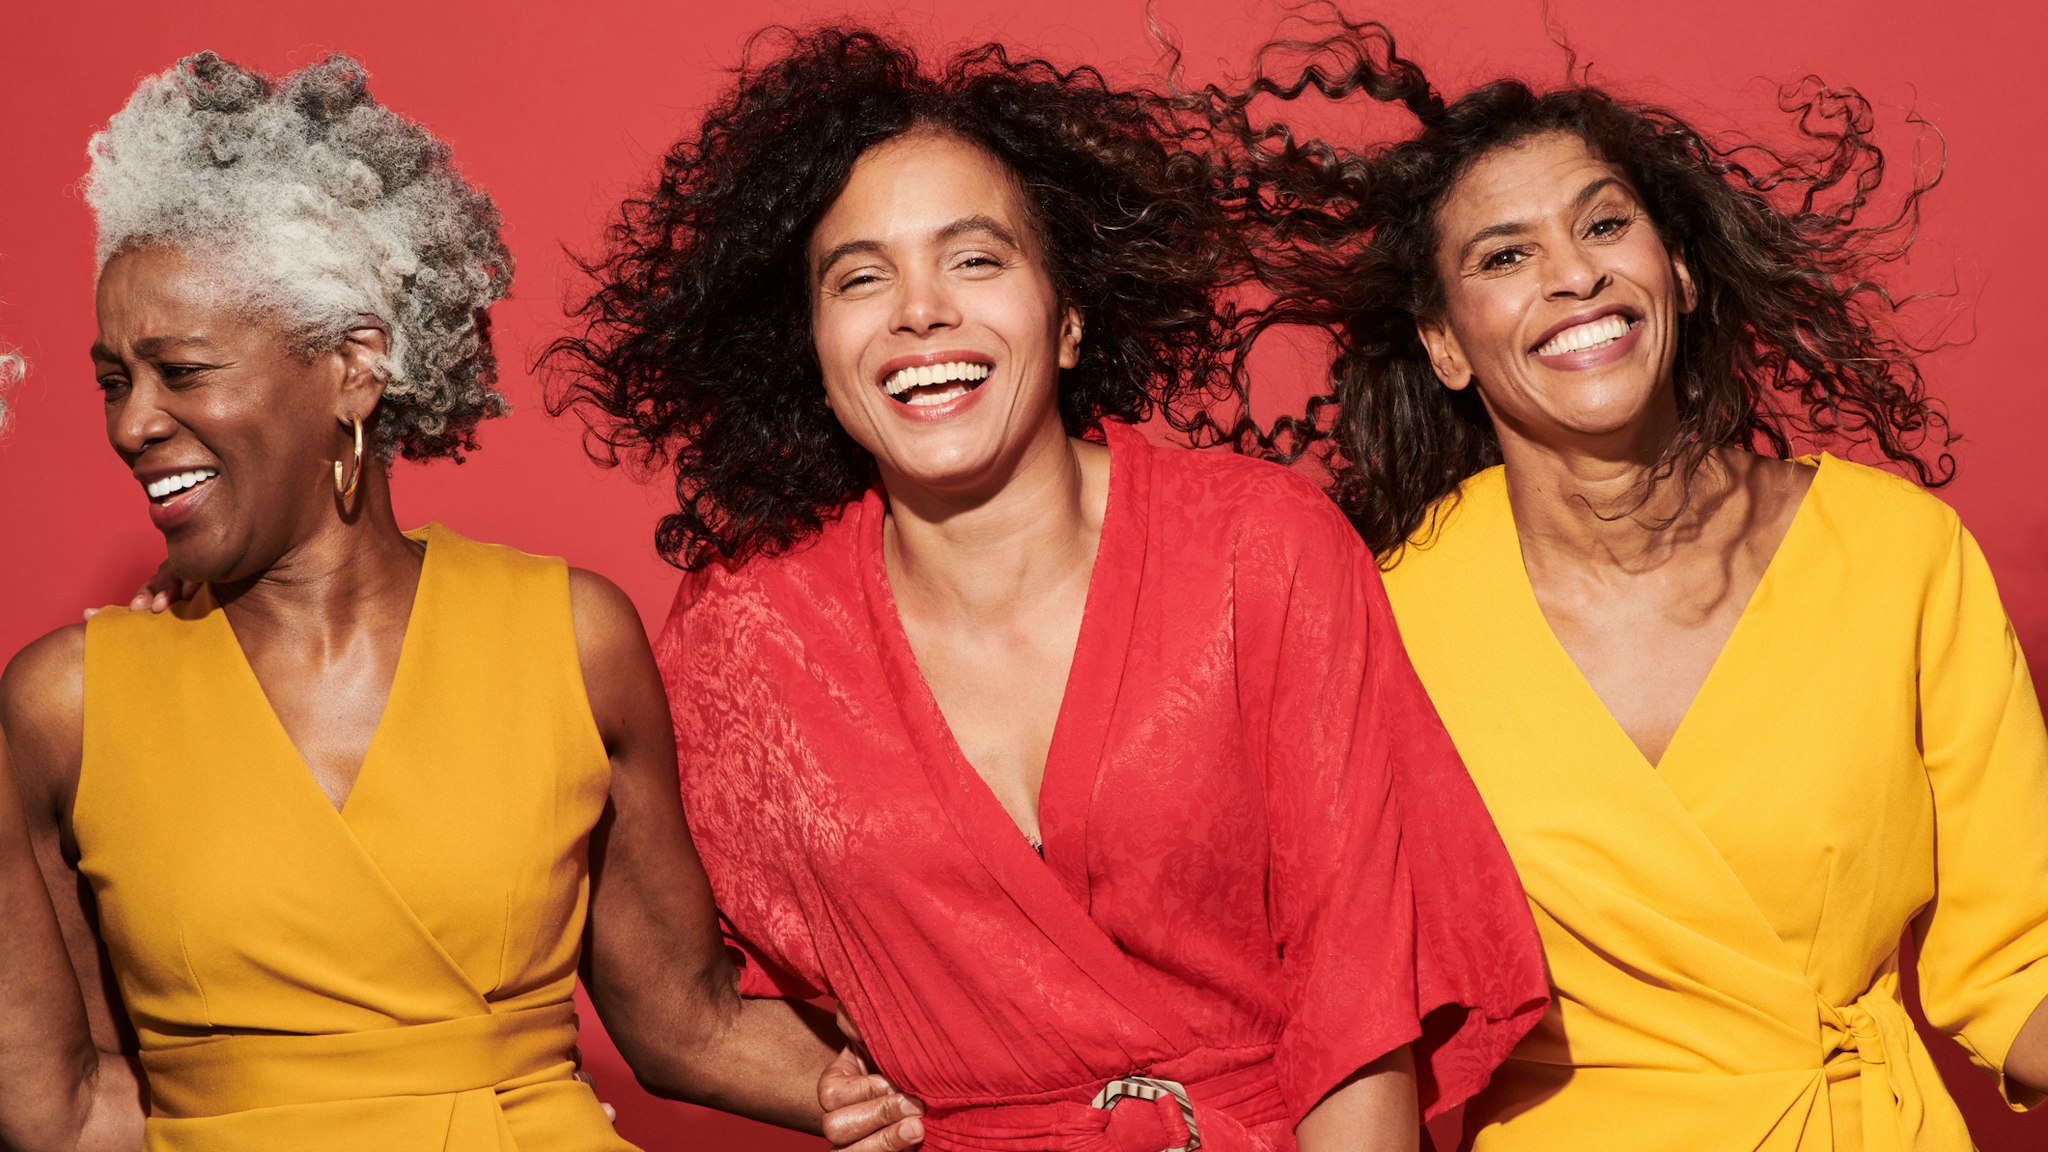 Portrait of a group of mature women against a red background.